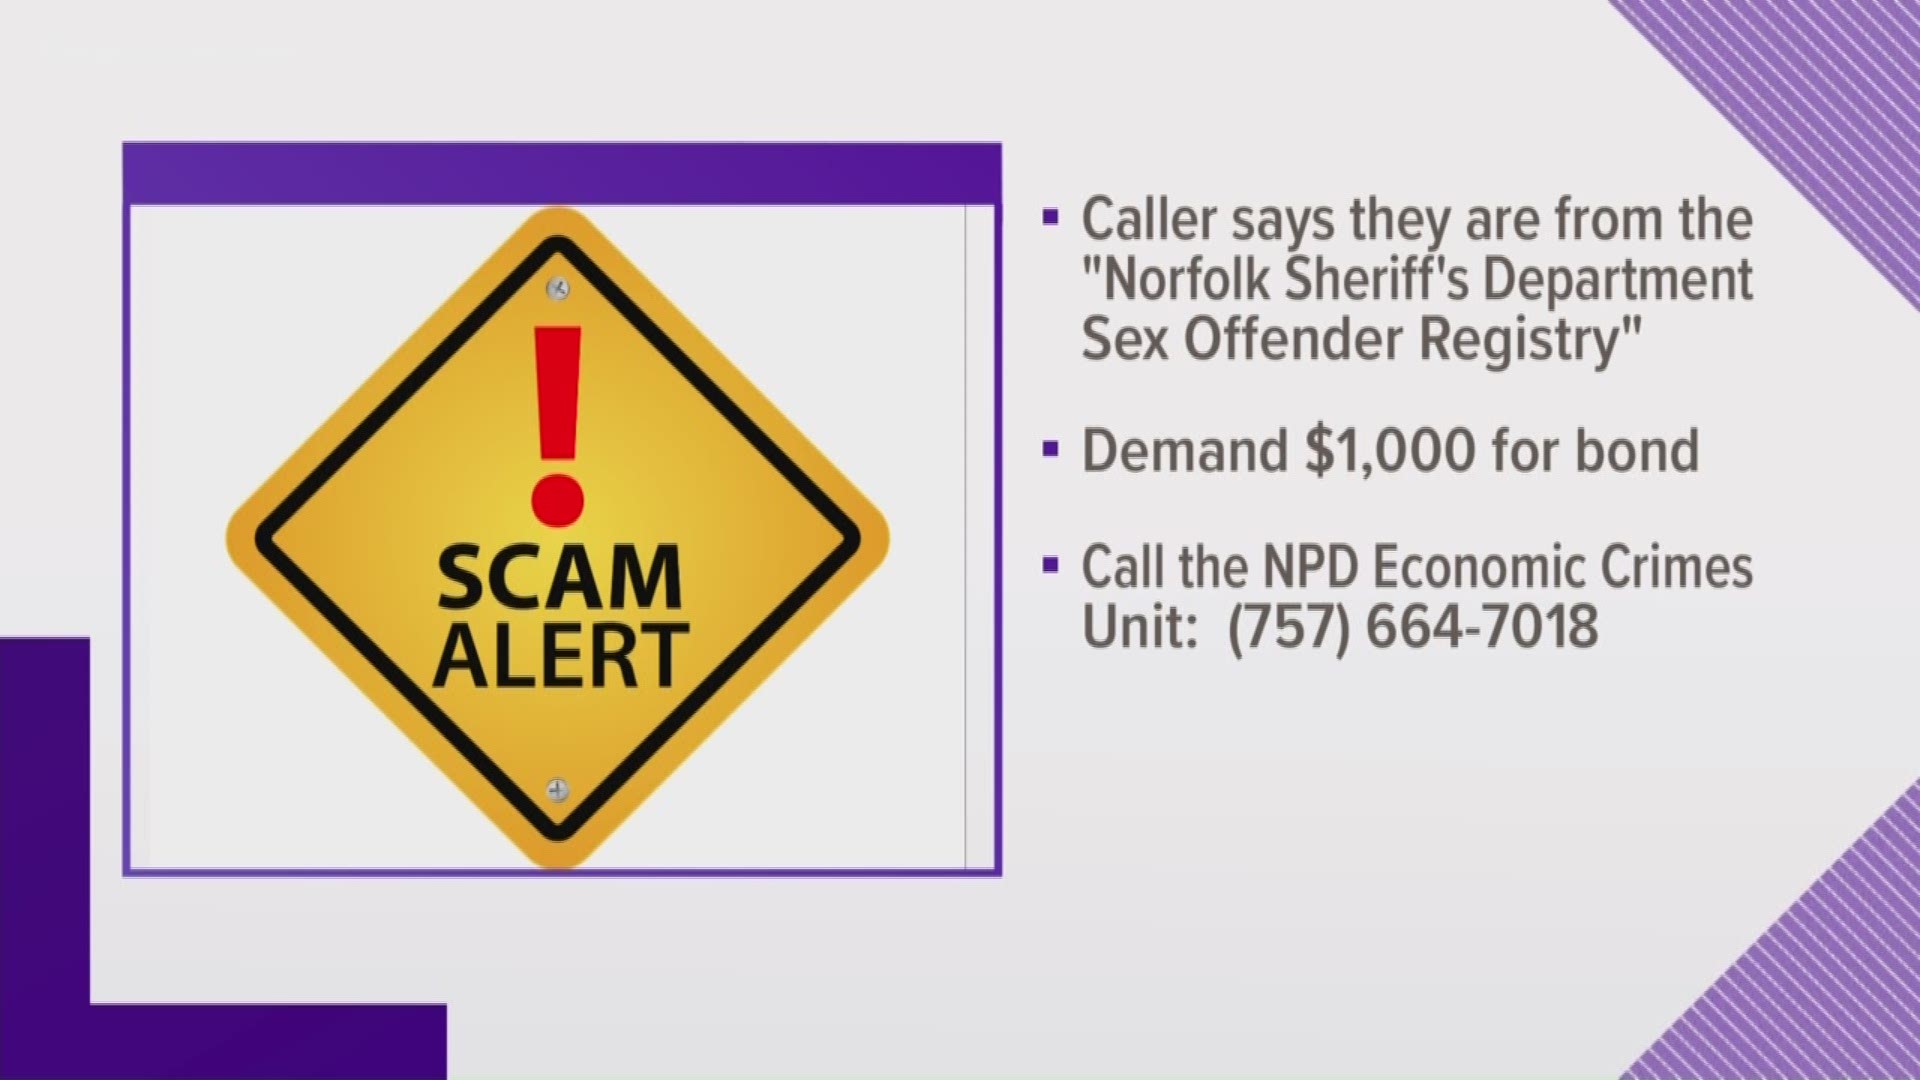 According to the Norfolk Sheriff's Office, a new phone scam is going around. The caller identifies himself as an employee of the sheriff's office and says there are warrants out for their arrest in relation to the Sex Offender Registry.